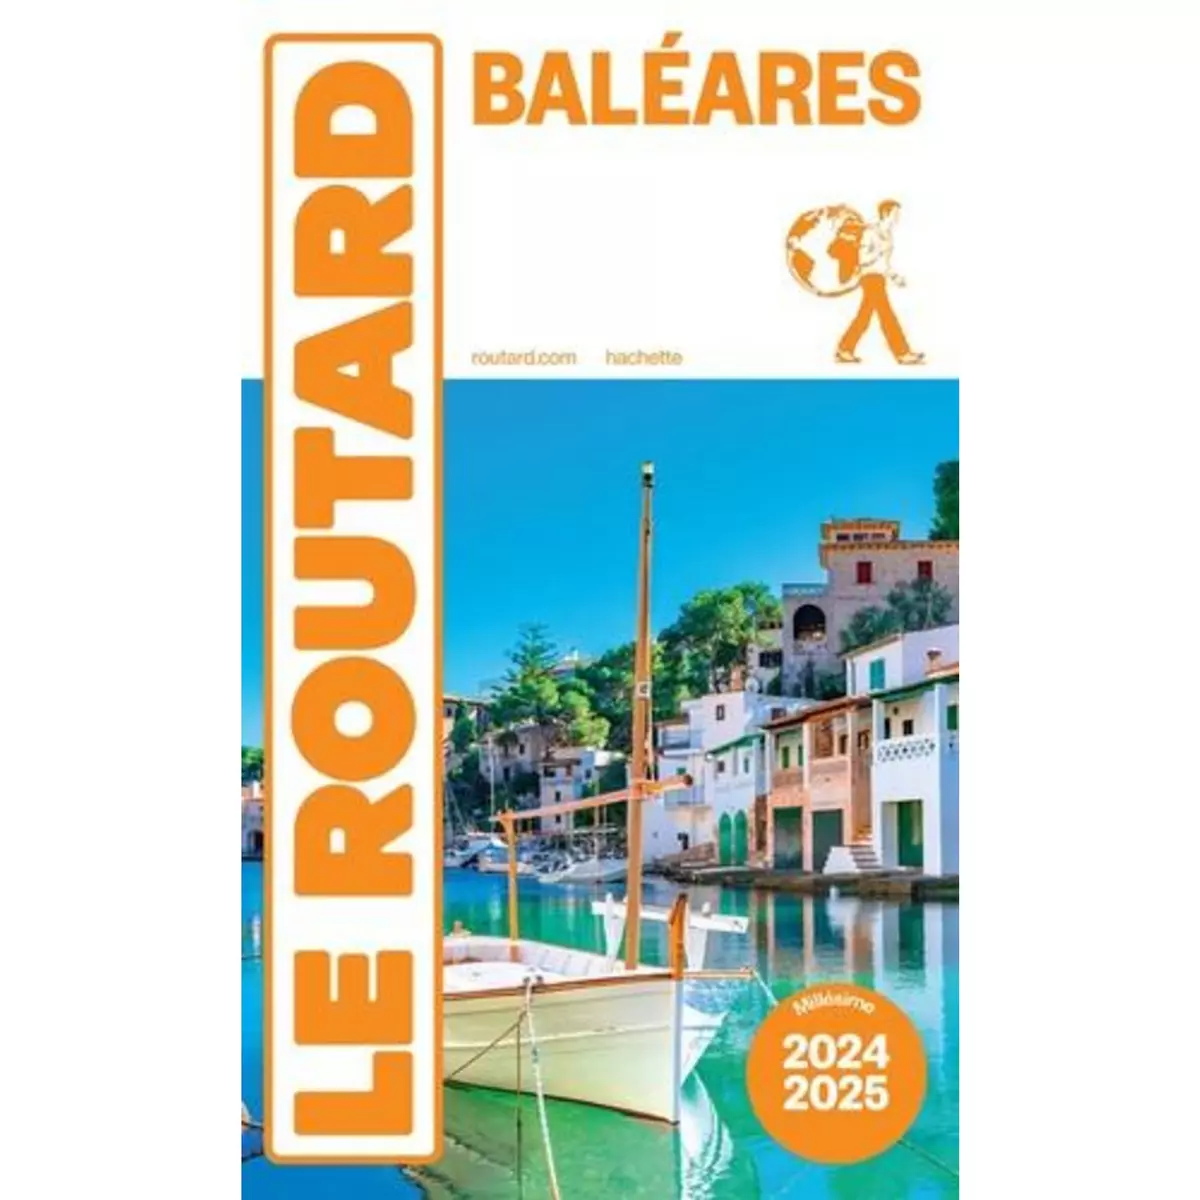  BALEARES. EDITION 2024-2025, Le Routard